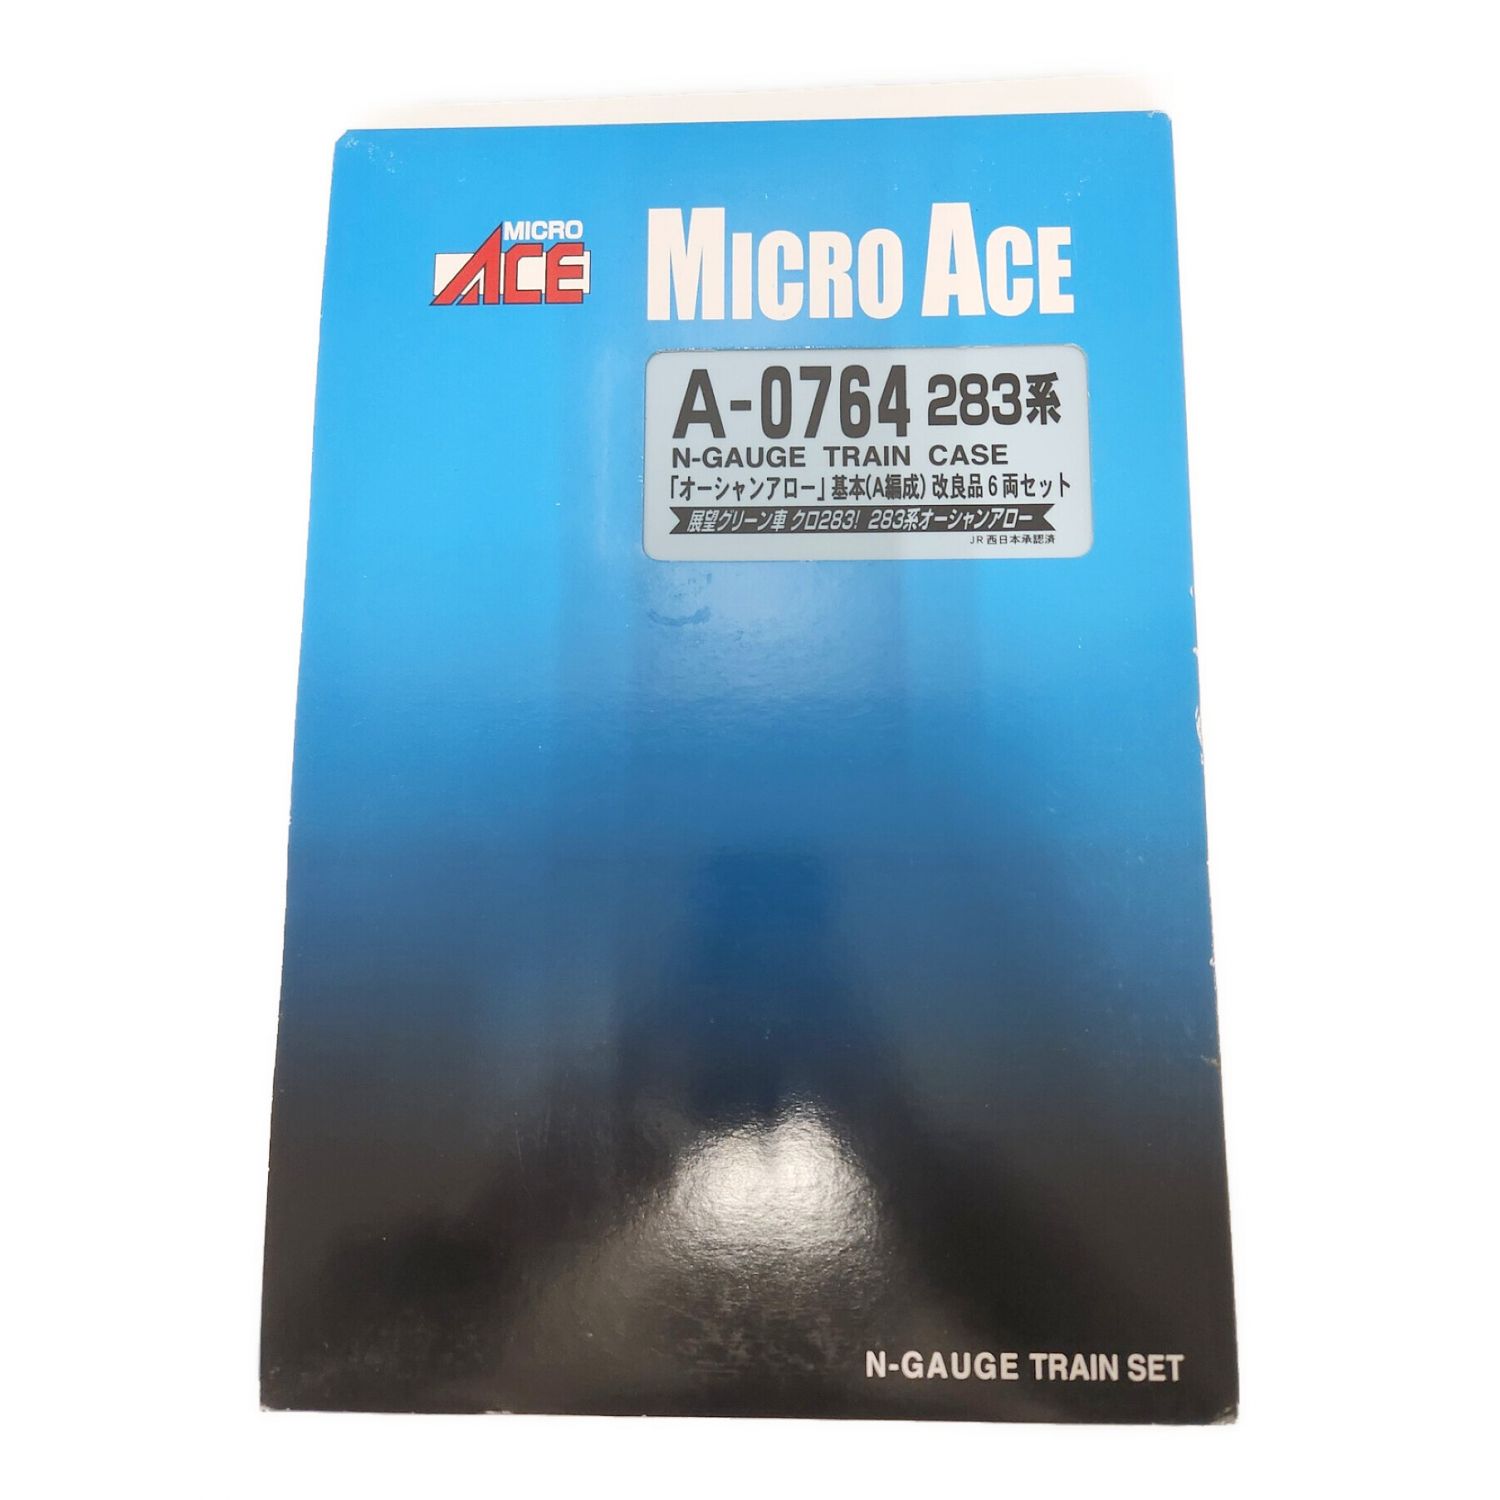 MICRO ACE (マイクロエース) Nゲージ A-0764 283系 6両セット｜トレファクONLINE